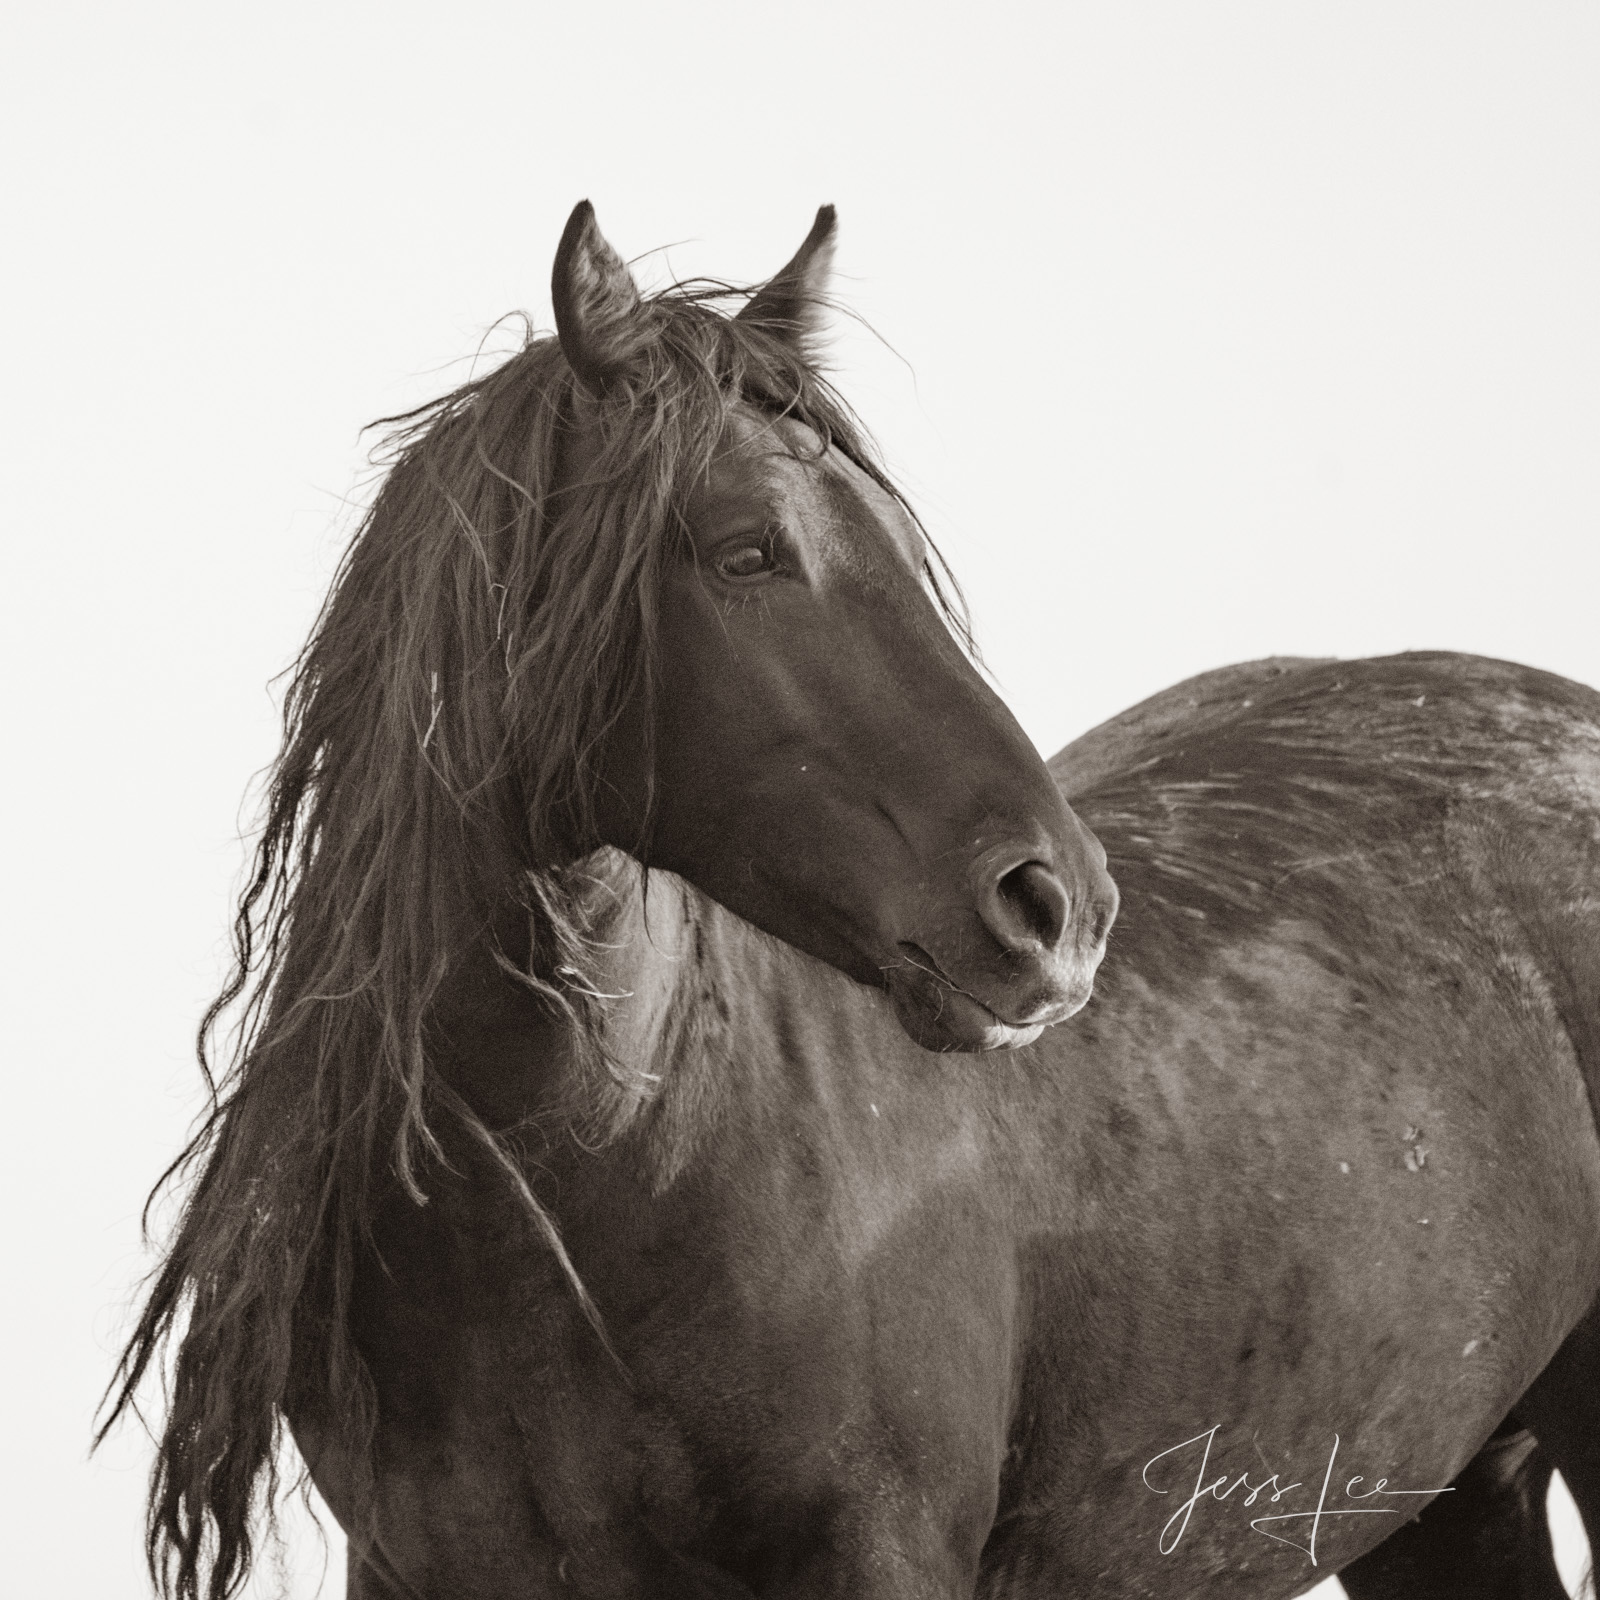 Black Stallion Stud a Fine art Limited Edition photo of 250 Exclusive Prints